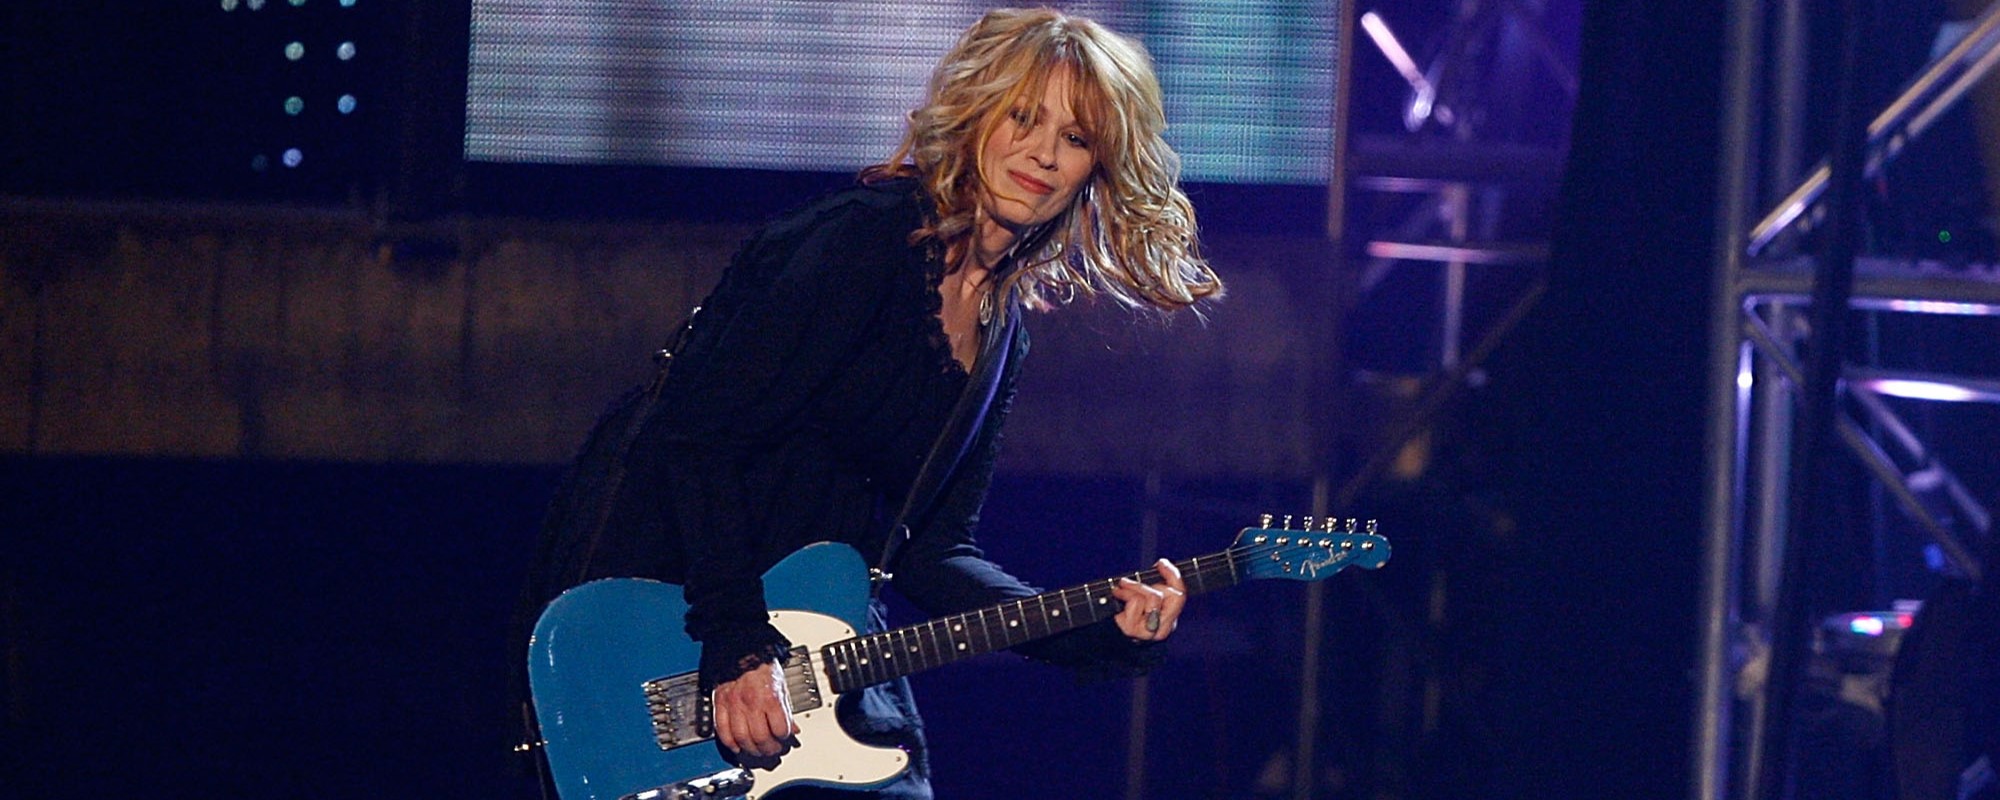 This Heart Hit “Never Felt Like A Heart Song” According to Nancy Wilson